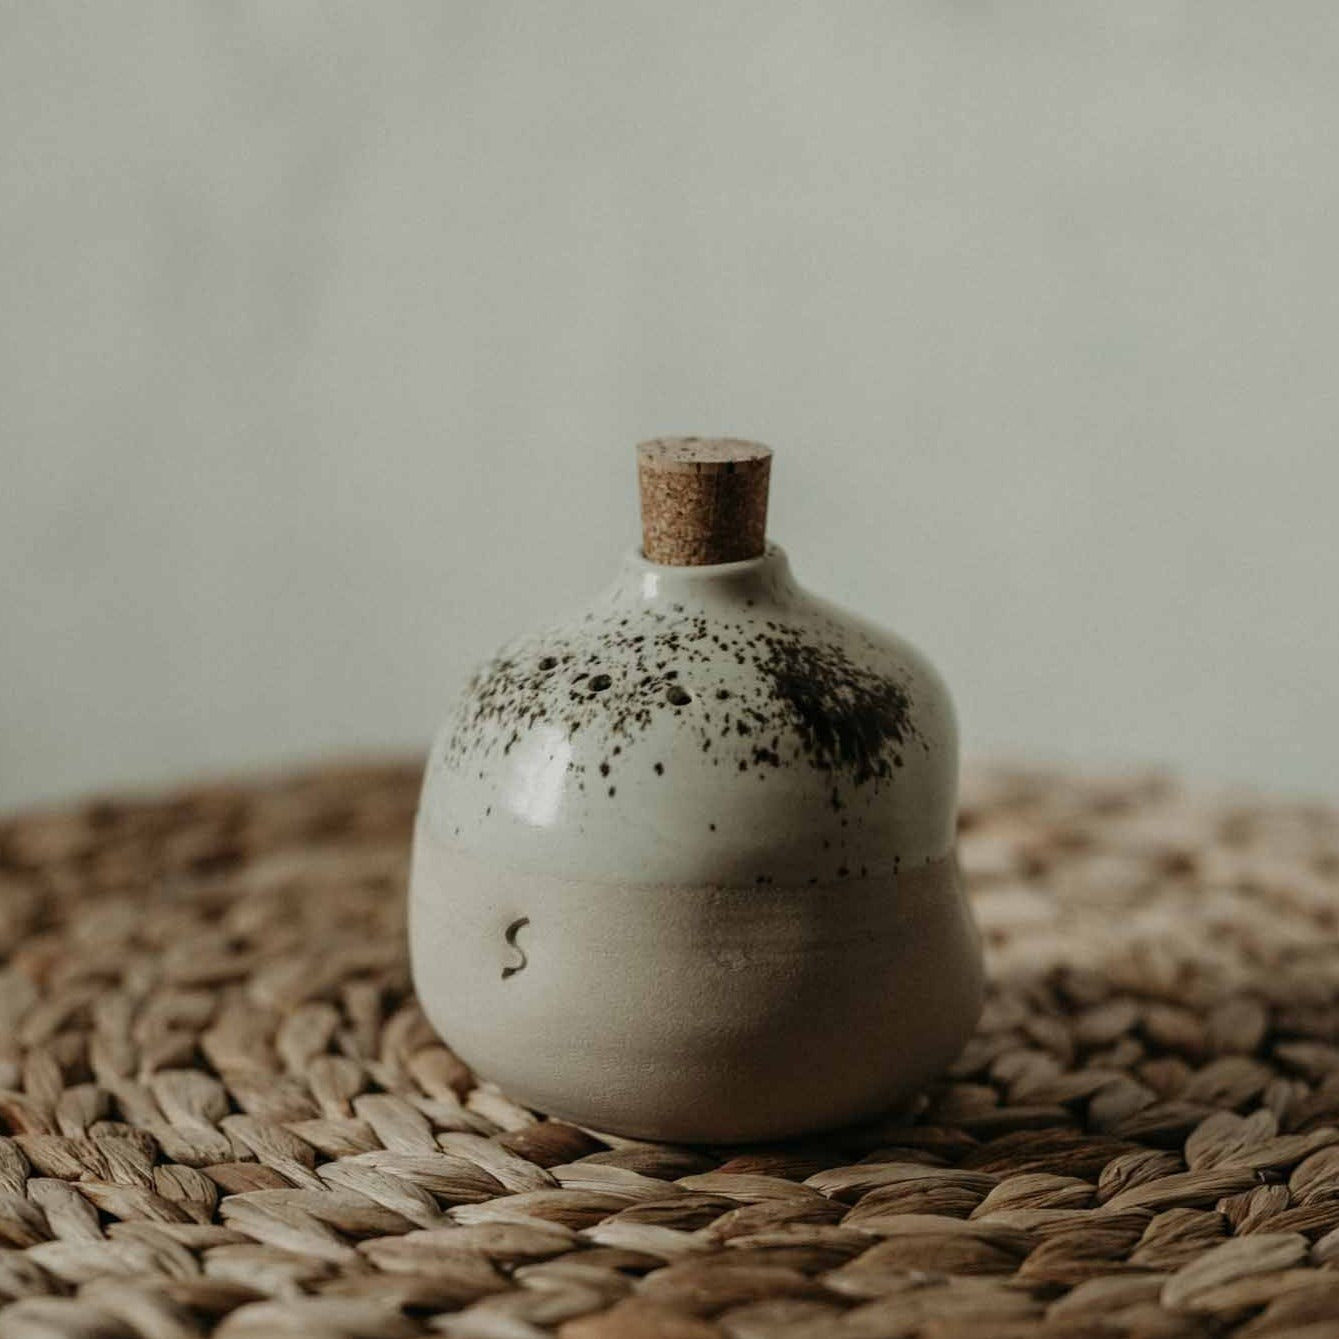 Handmade clay salt and pepper shakers with a milk-white glaze, adding elegance to your kitchen.